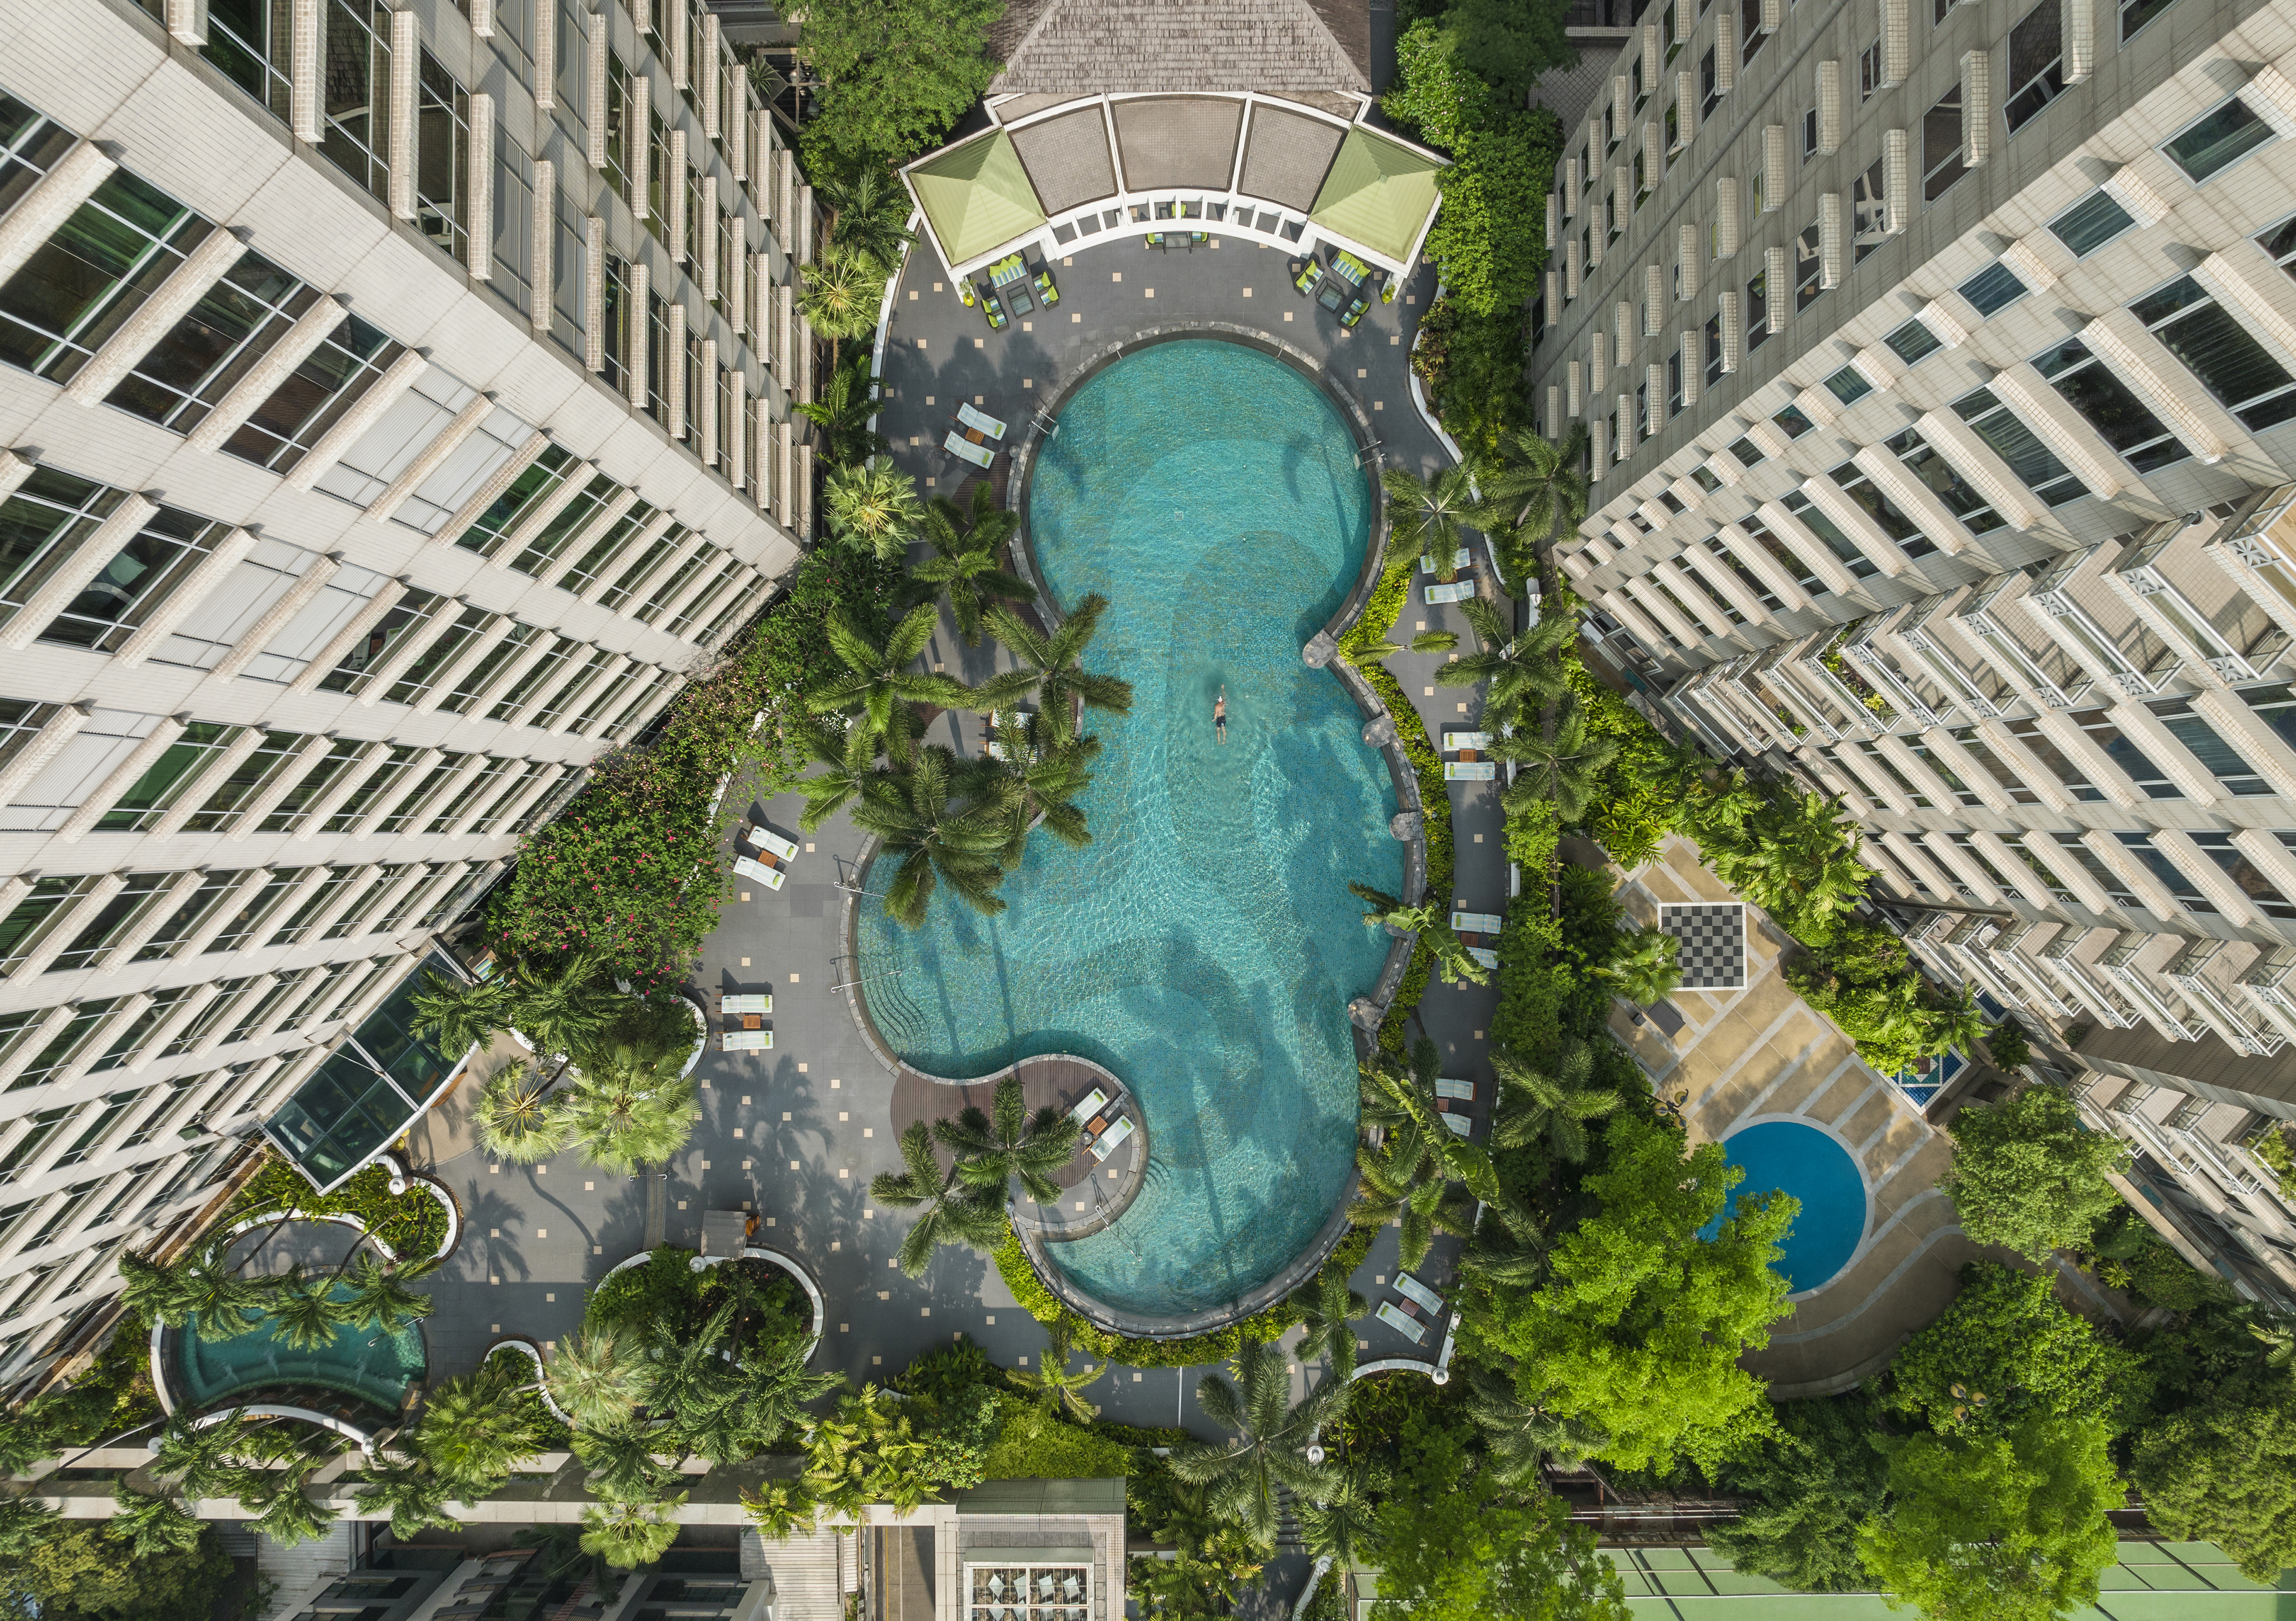 Guest in Outdoor Pool, Aerial View